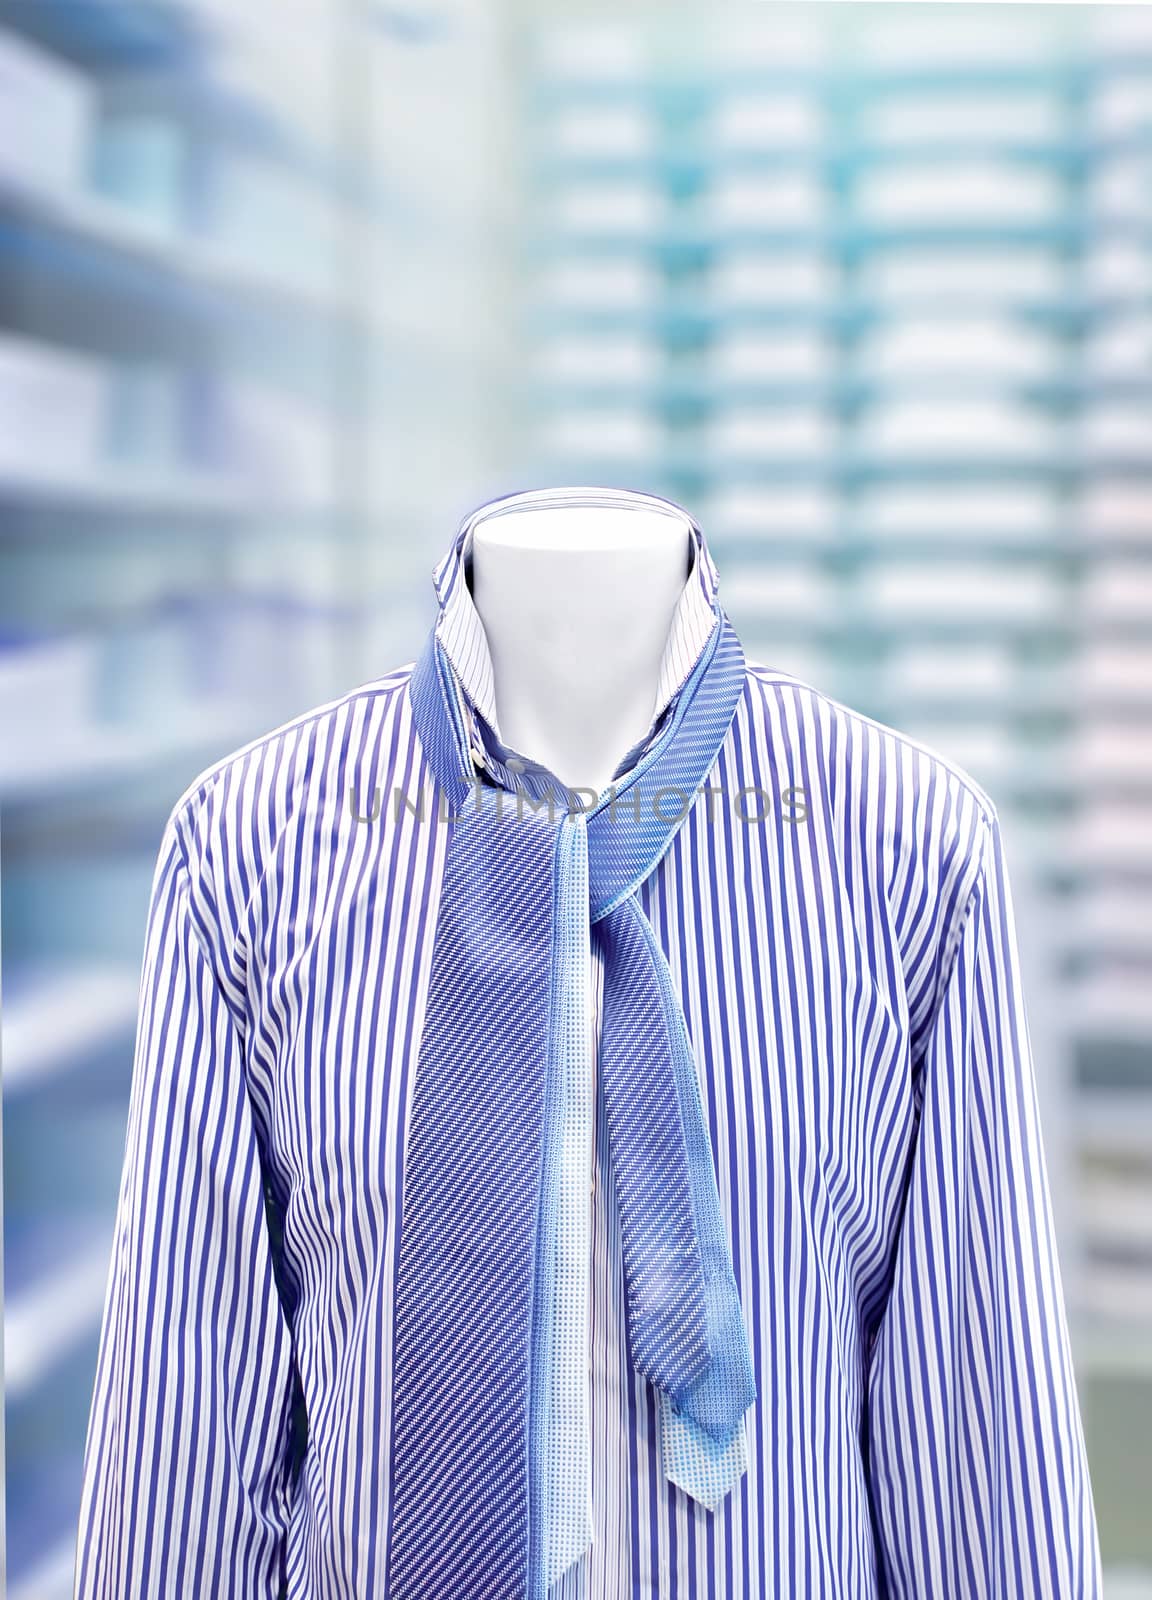 men's classic fashion (shirts and ties in store on mannequin)